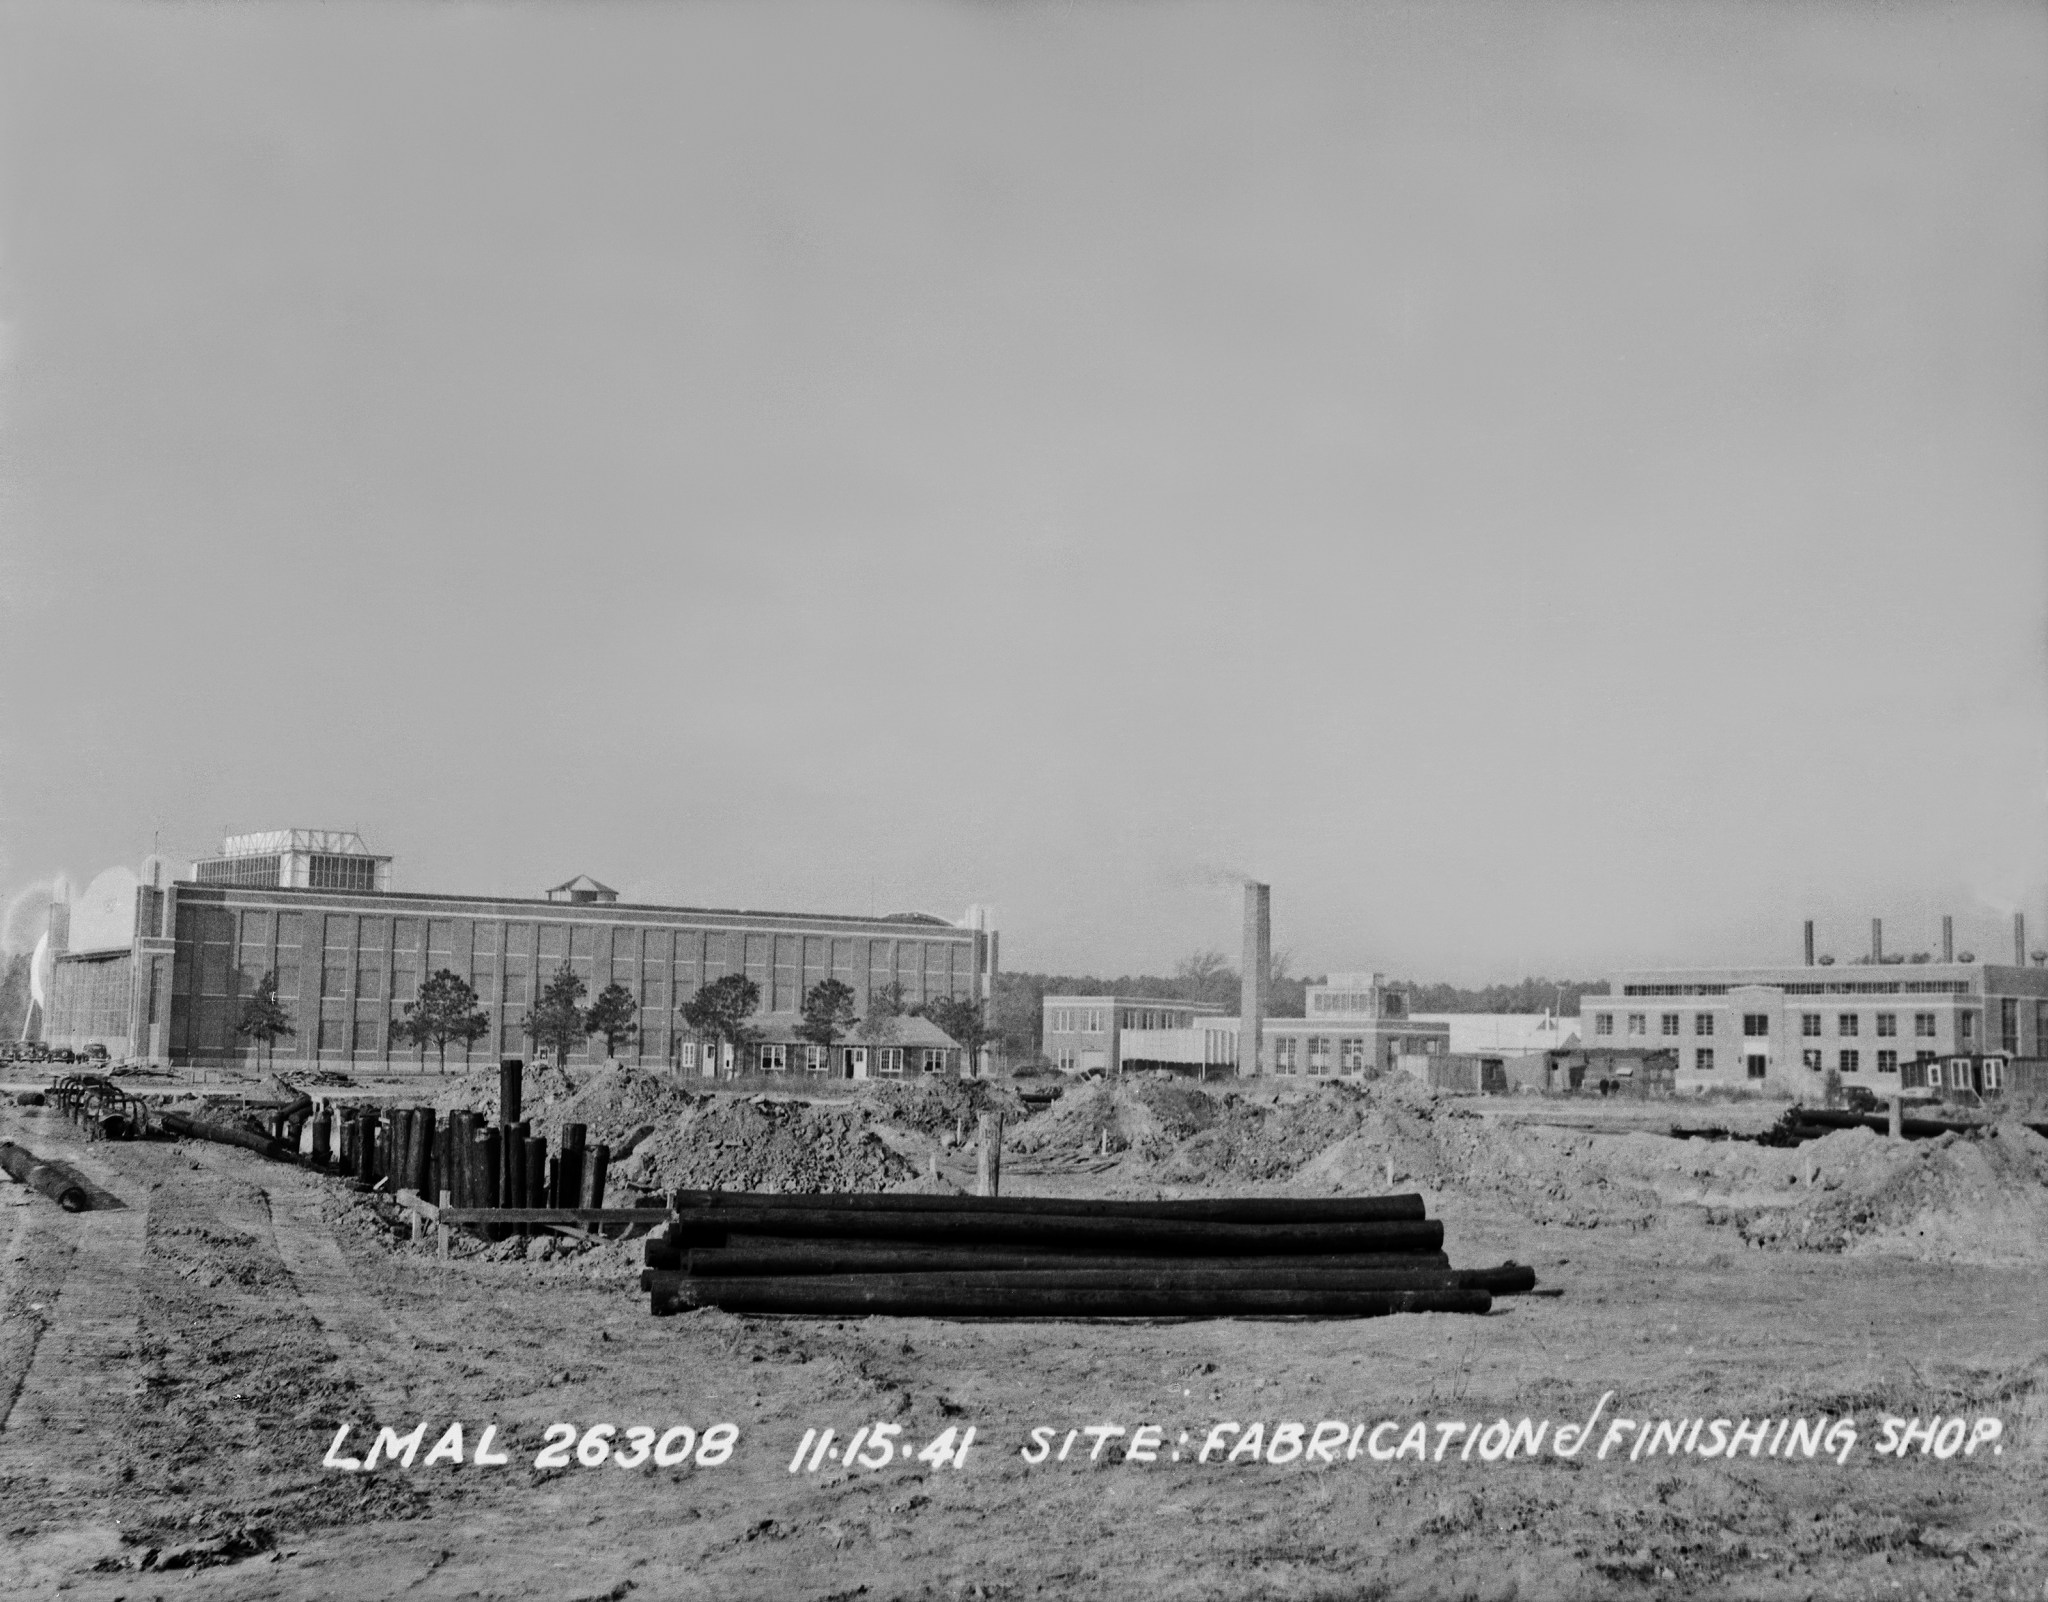 This is a photo of the construction of Building 1194, the Fabrication Shop, which began in 1941.